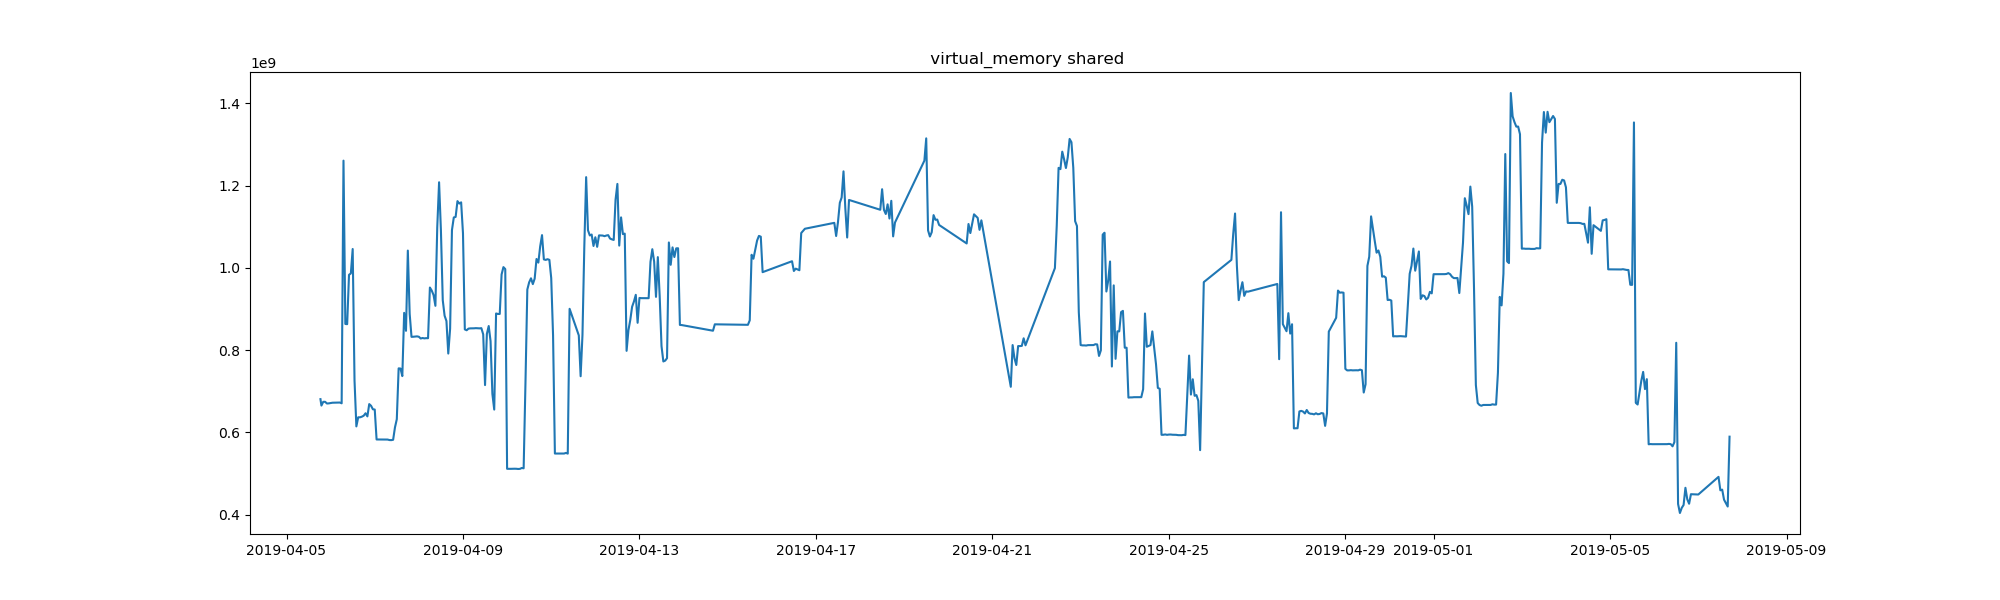 task-memory-virtual_memory-total-available-percent-used-free-active-inactive-buffers-cached-shared.png